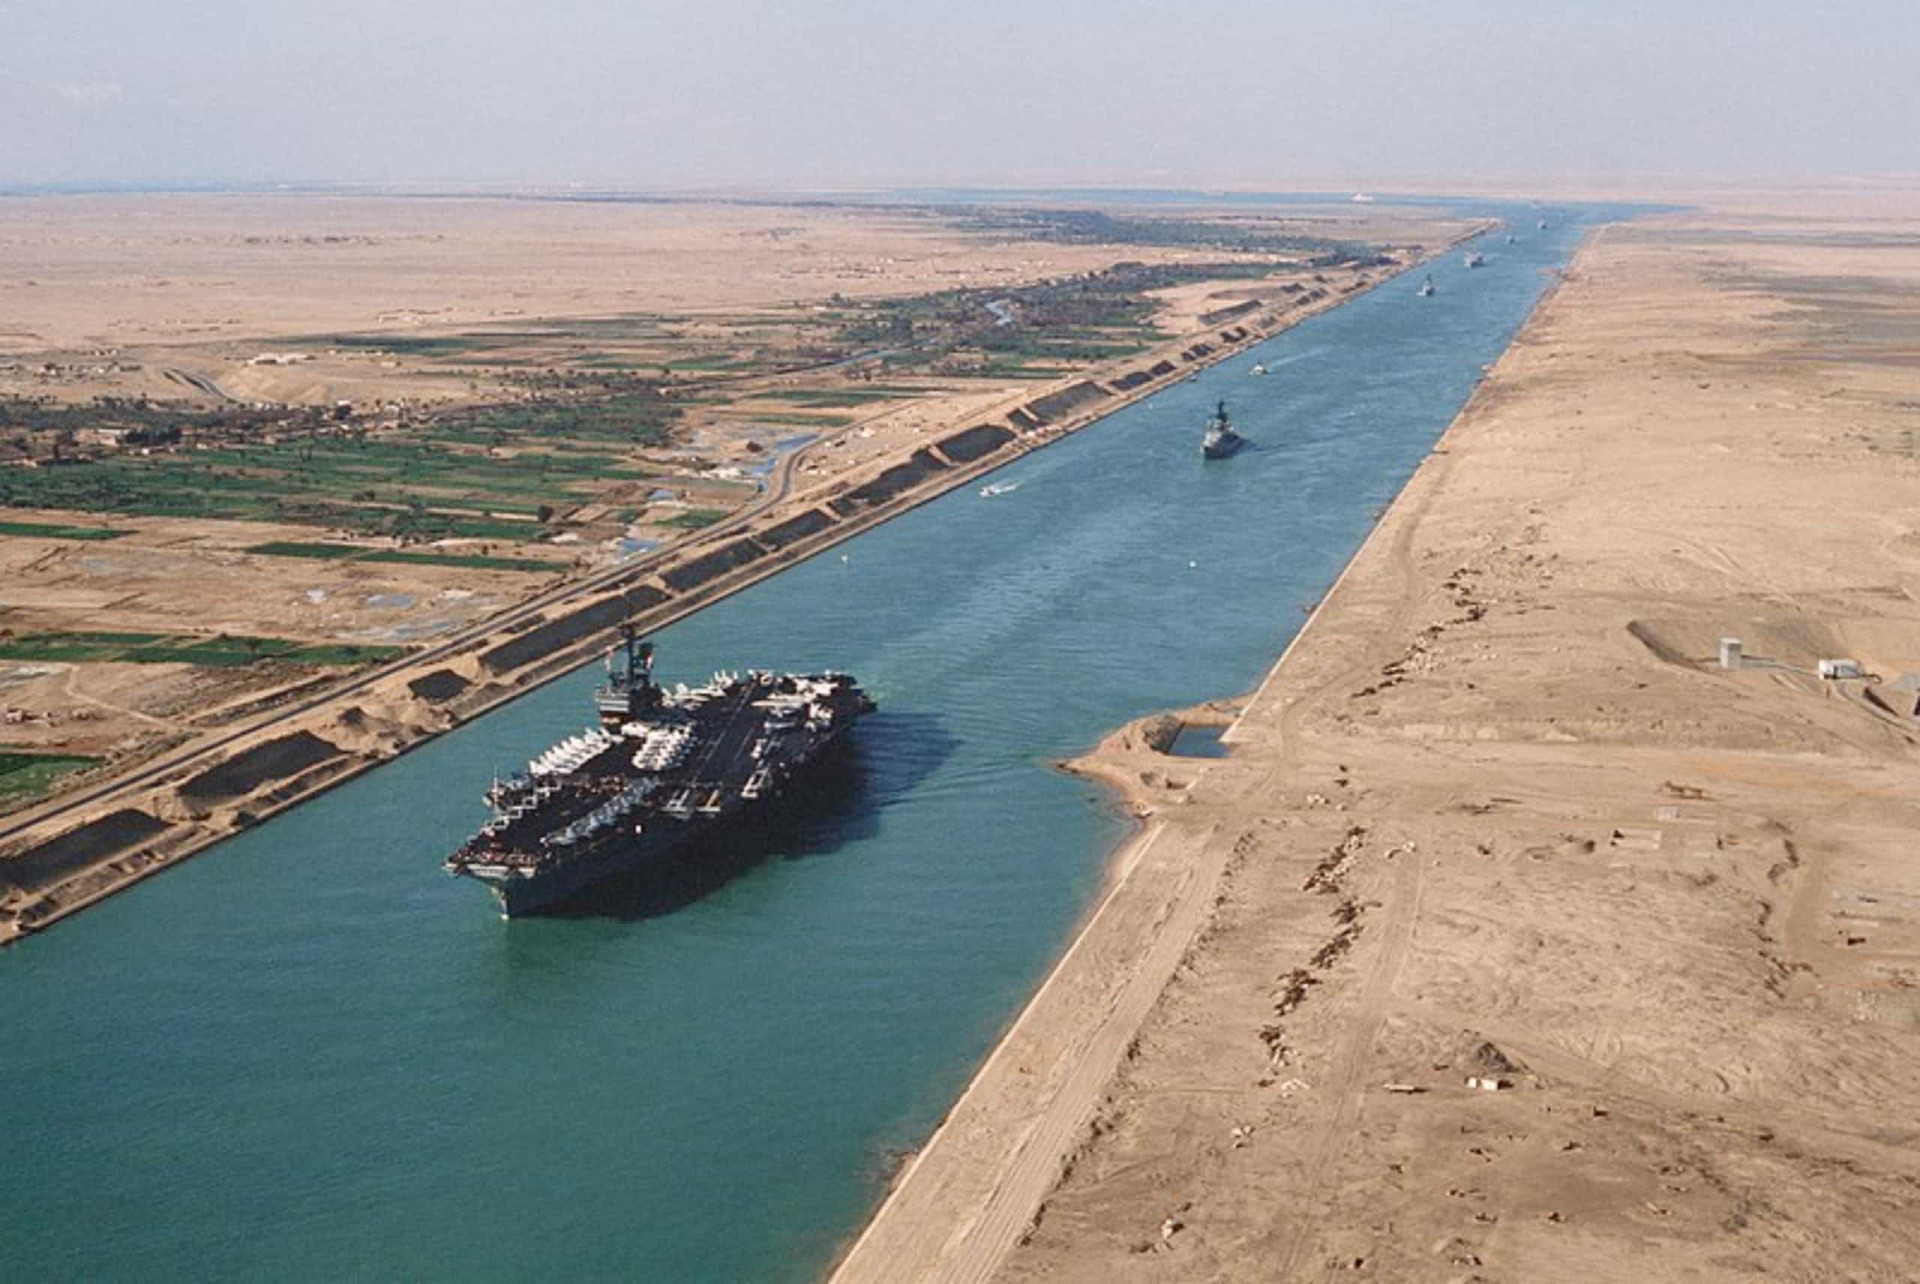 <p>Ships using this vital waterway include military vessels, which take advantage of the canal's strategic location. Pictured is the USS <em>America</em> aircraft carrier.</p>